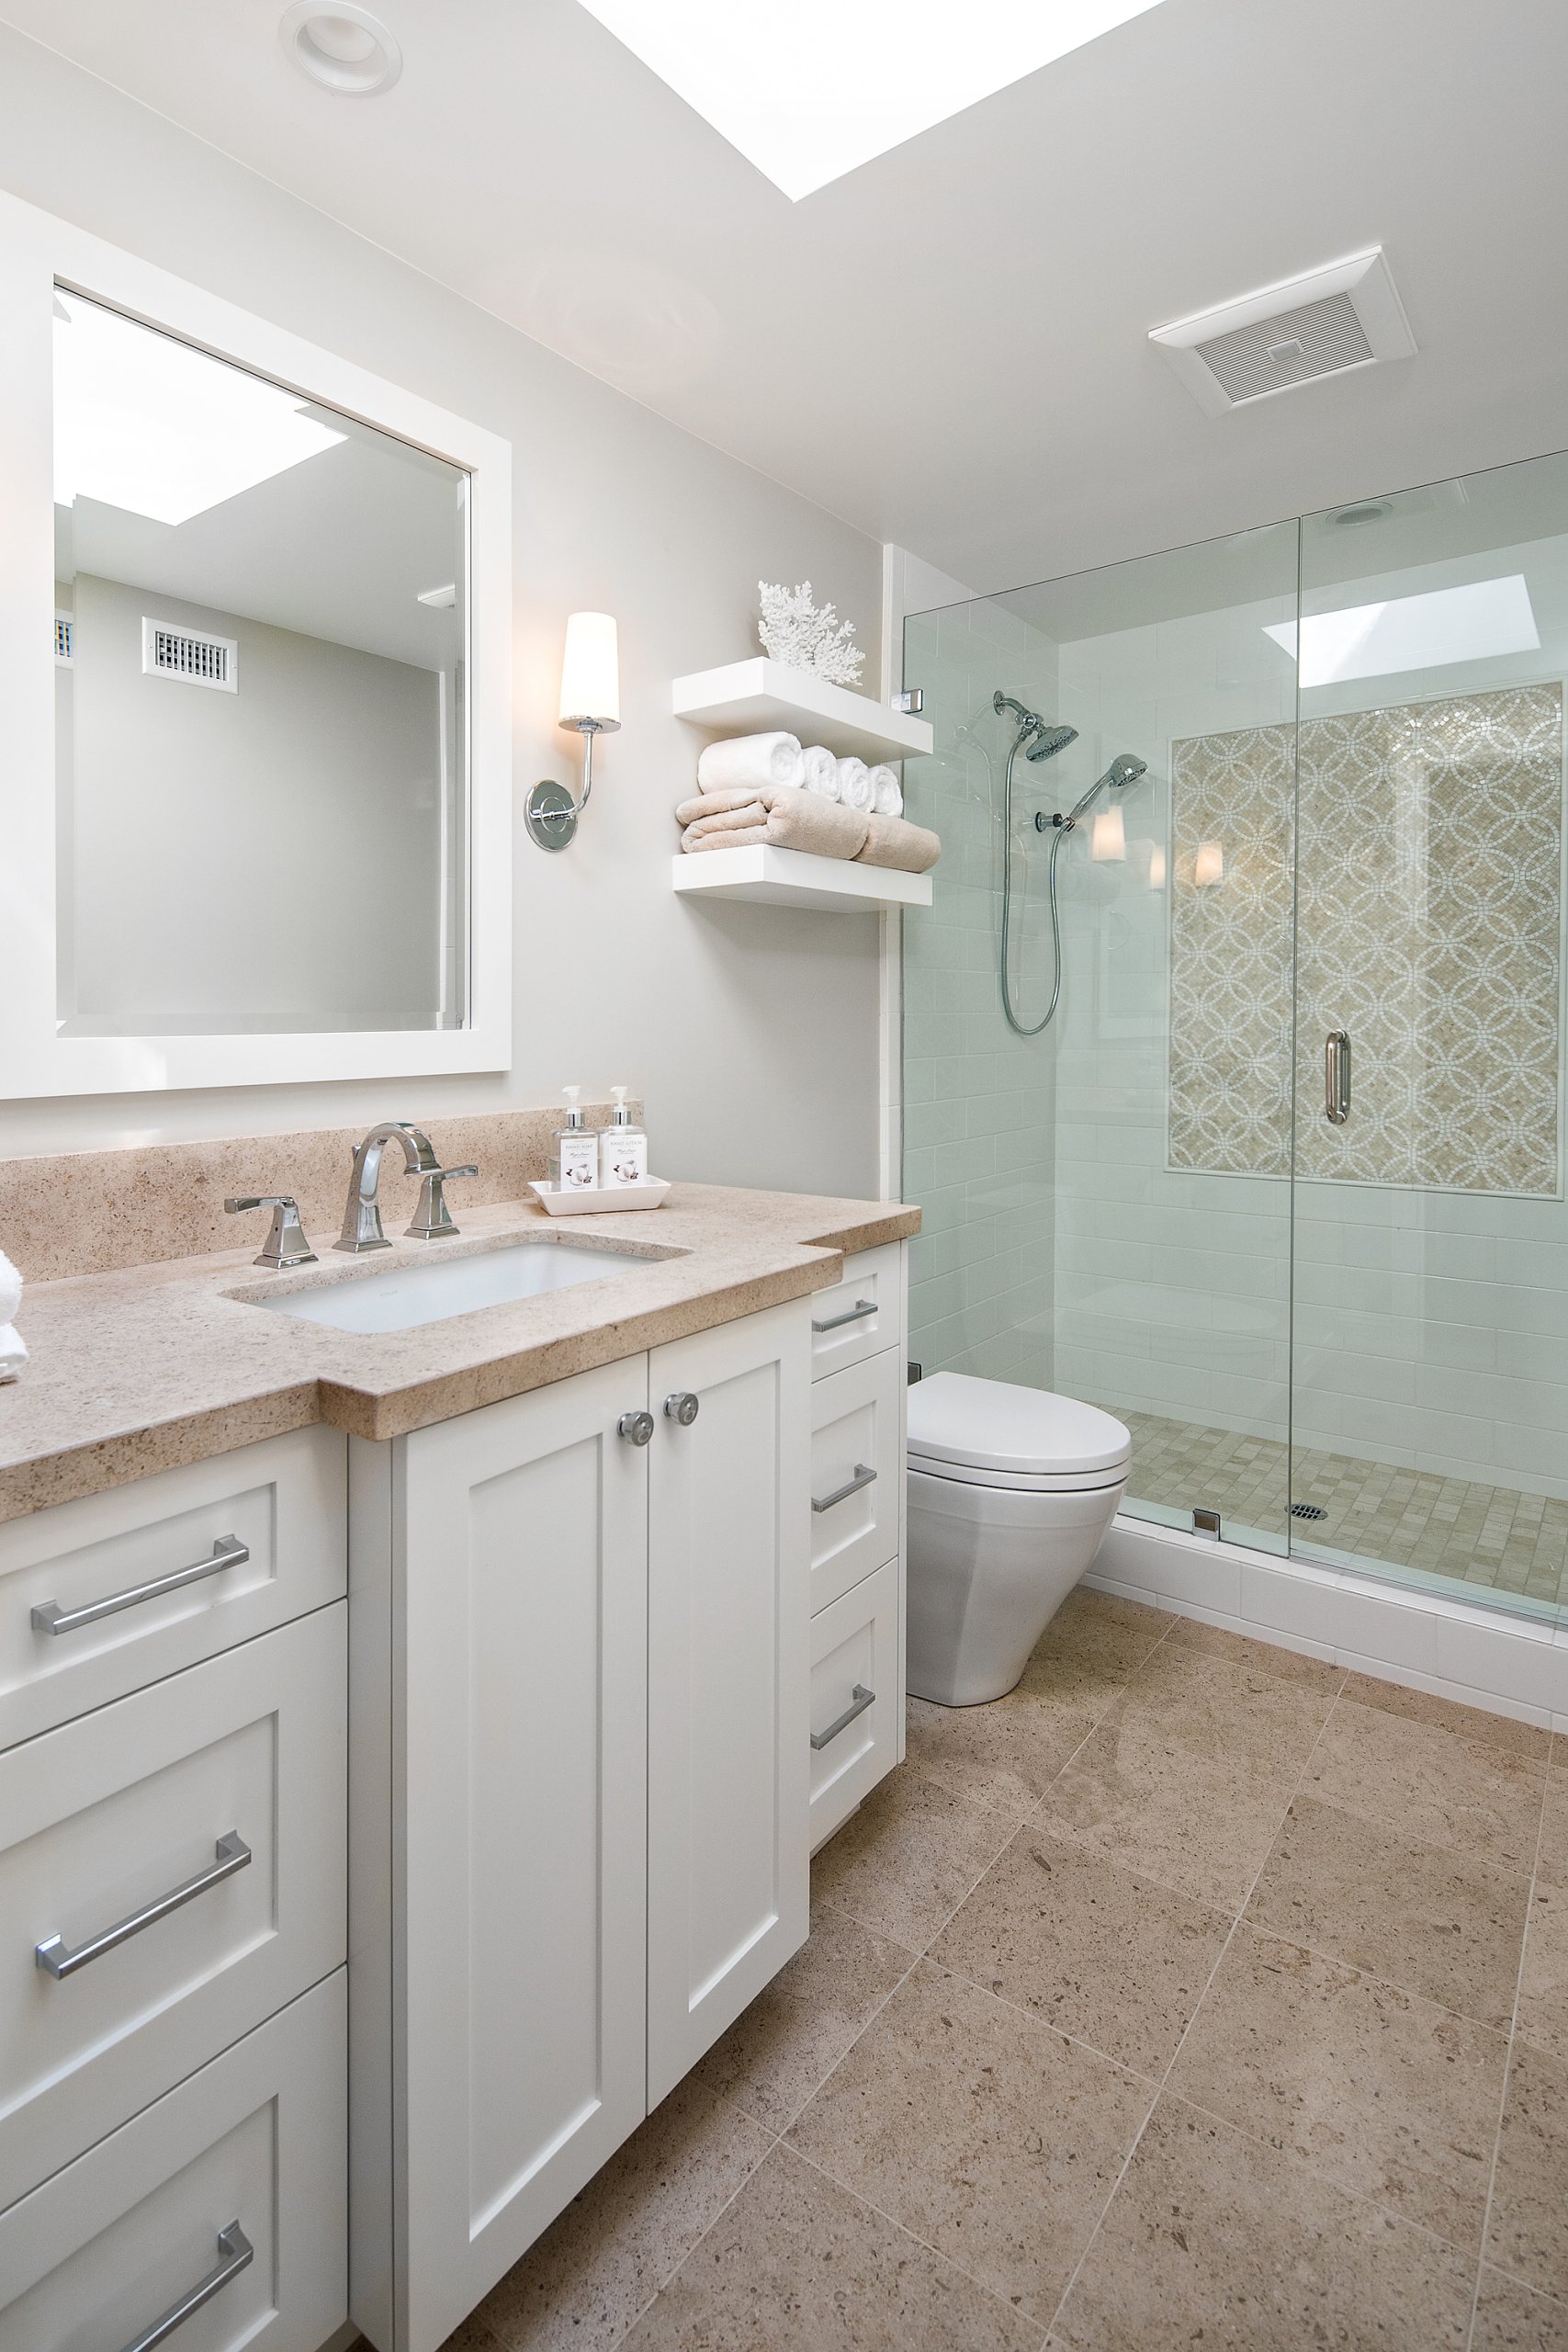 Small Bathroom Remodeling Ideas Sea, Bathroom Remodel Pictures For Small Bathrooms